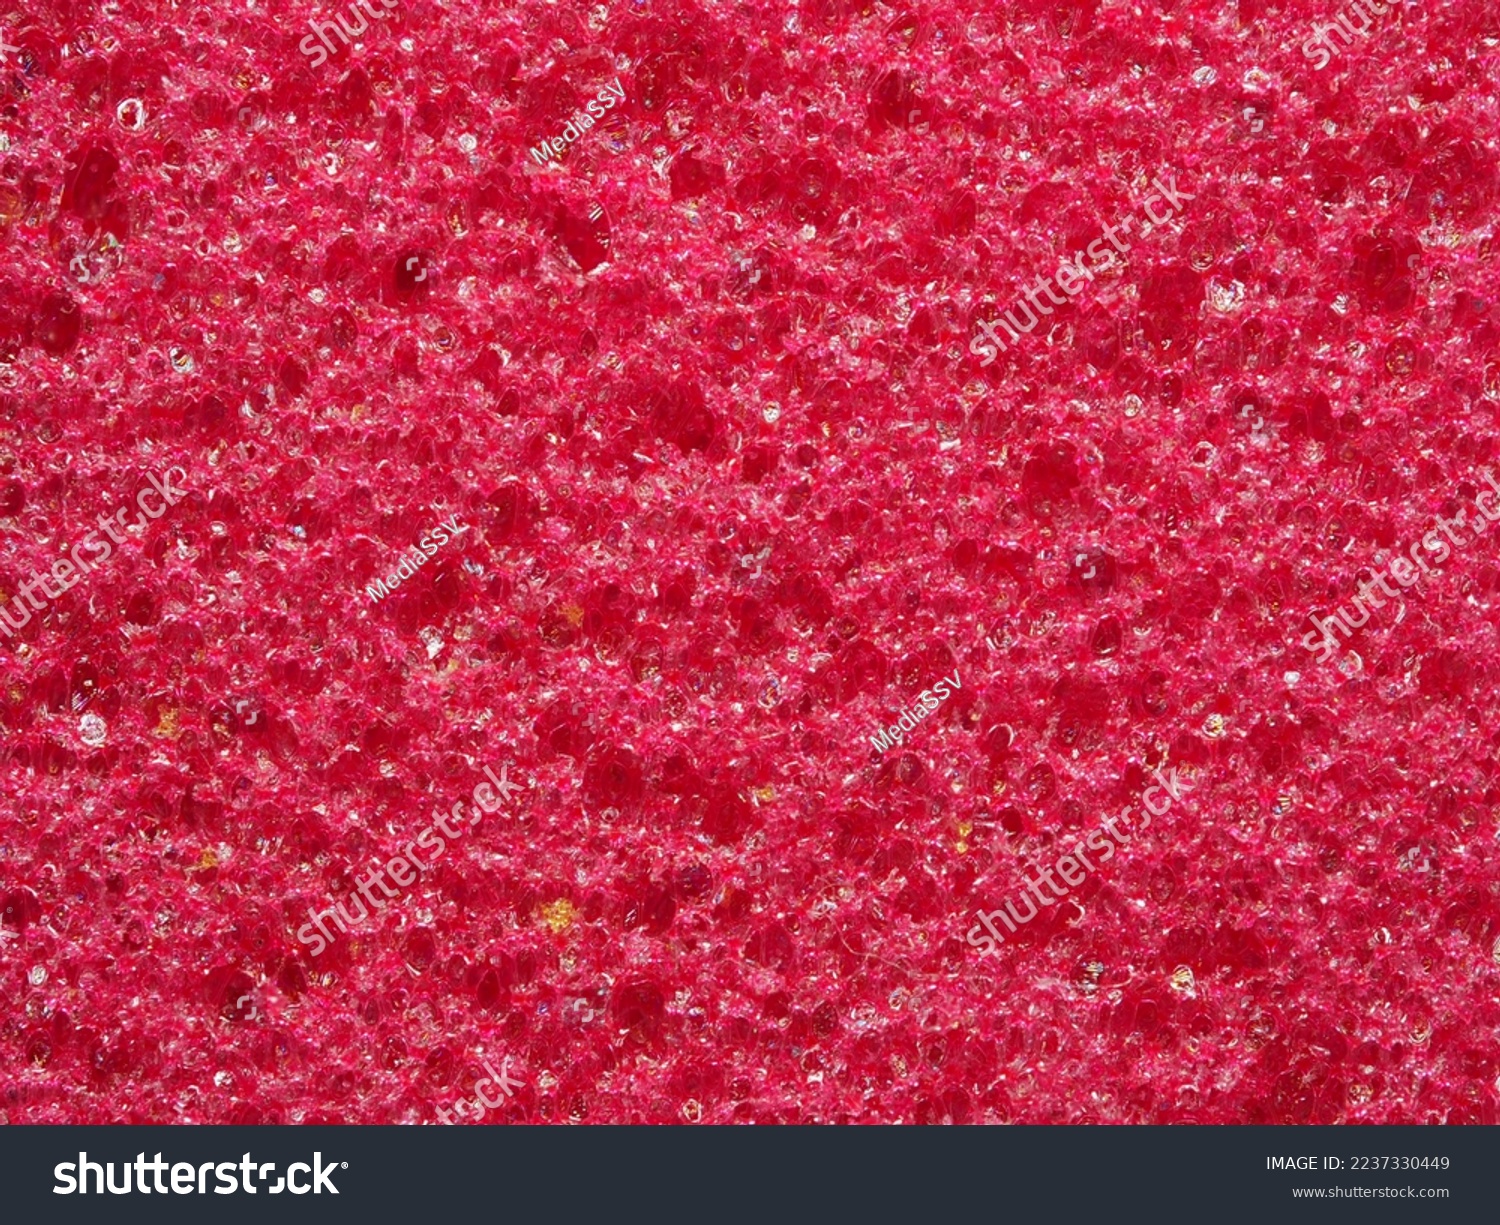 close-up, background, texture, large vertical banner. heterogeneous surface fine pore structure bright saturated red pumice stone for finger care. full depth of field. high resolution photo #2237330449